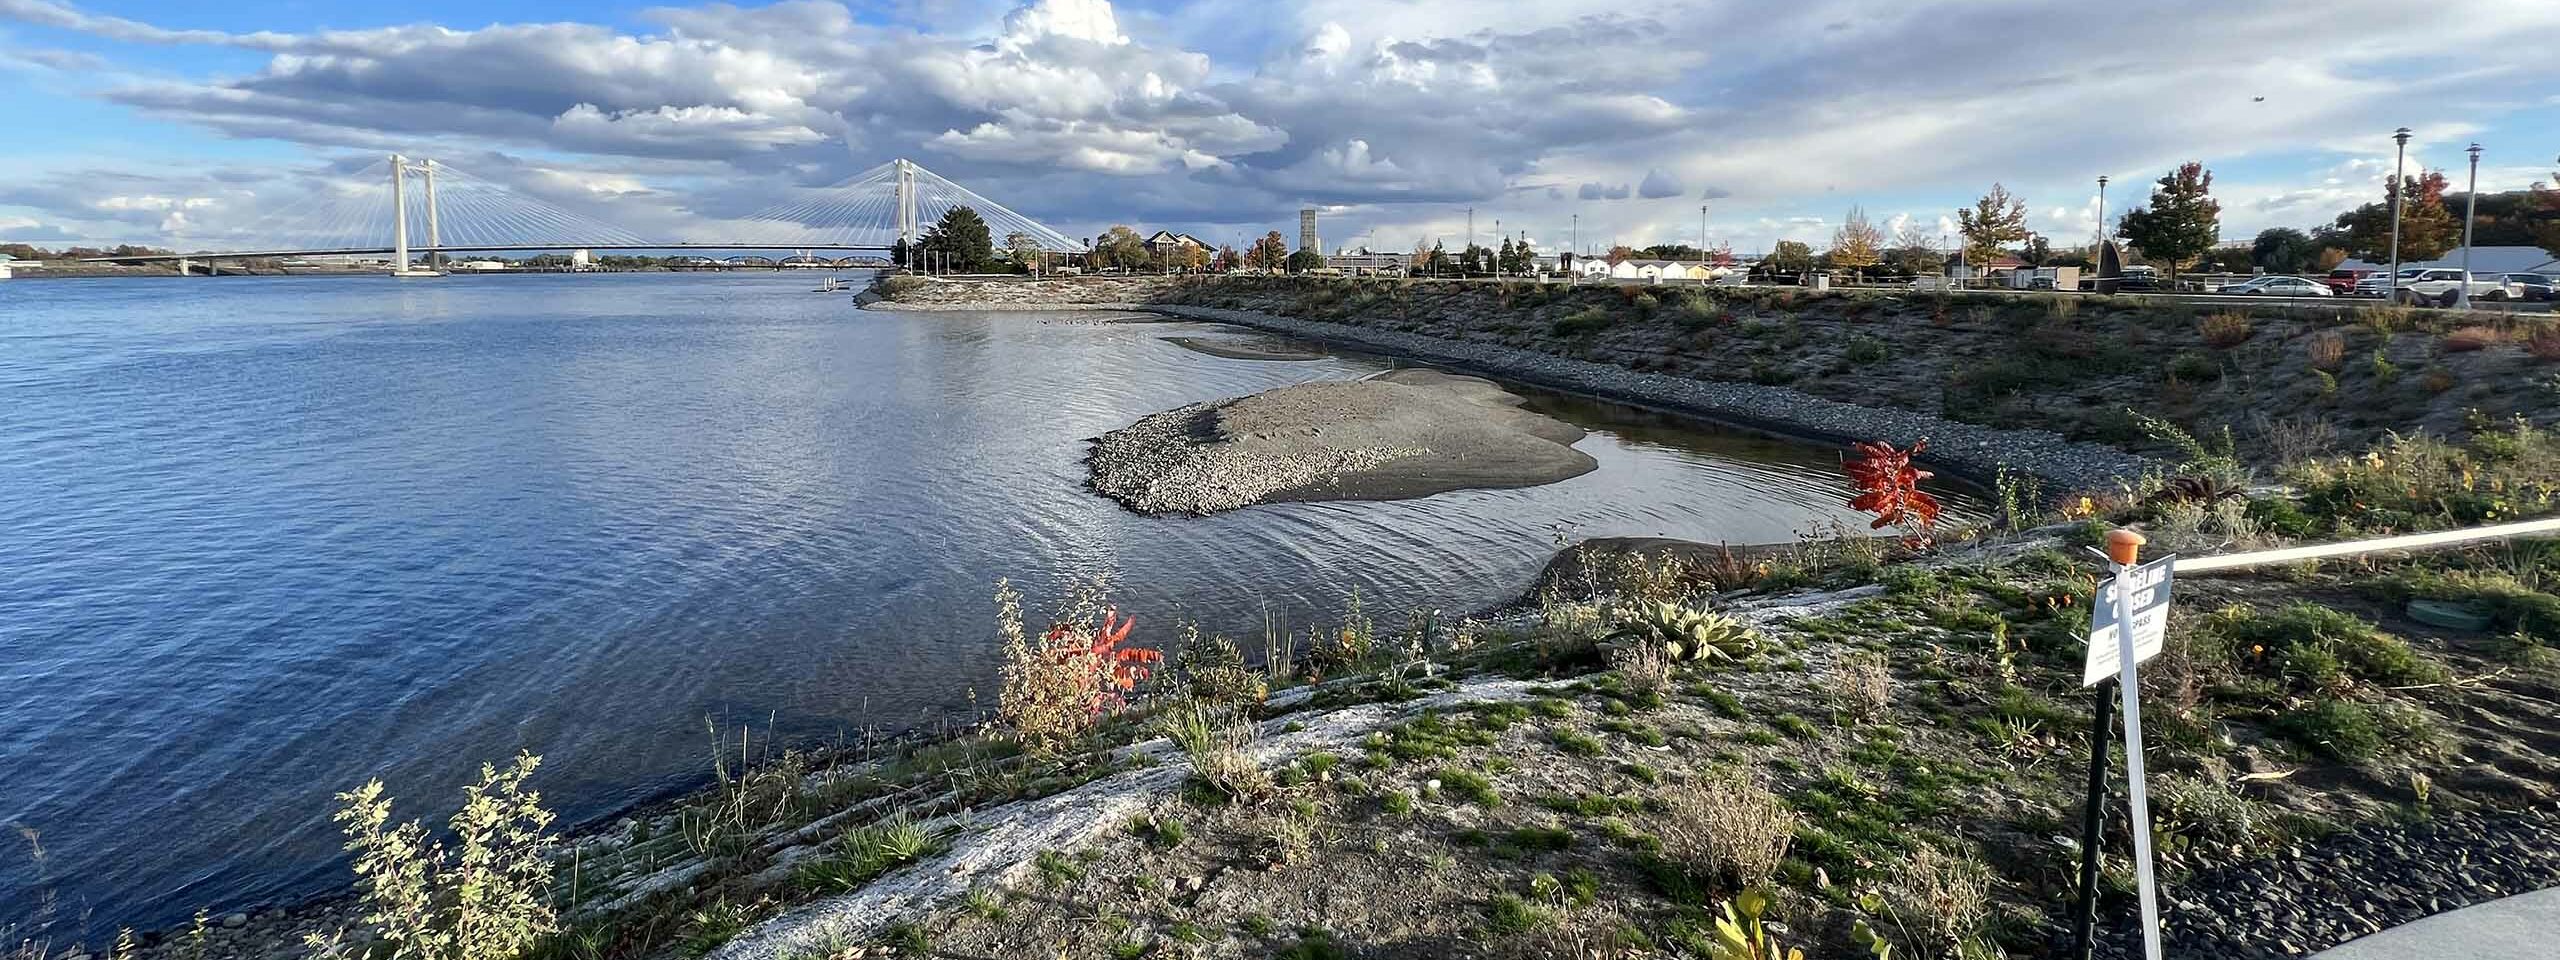 New plantings along the river shore and Clover Island "notch" help stabilize the shoreline.